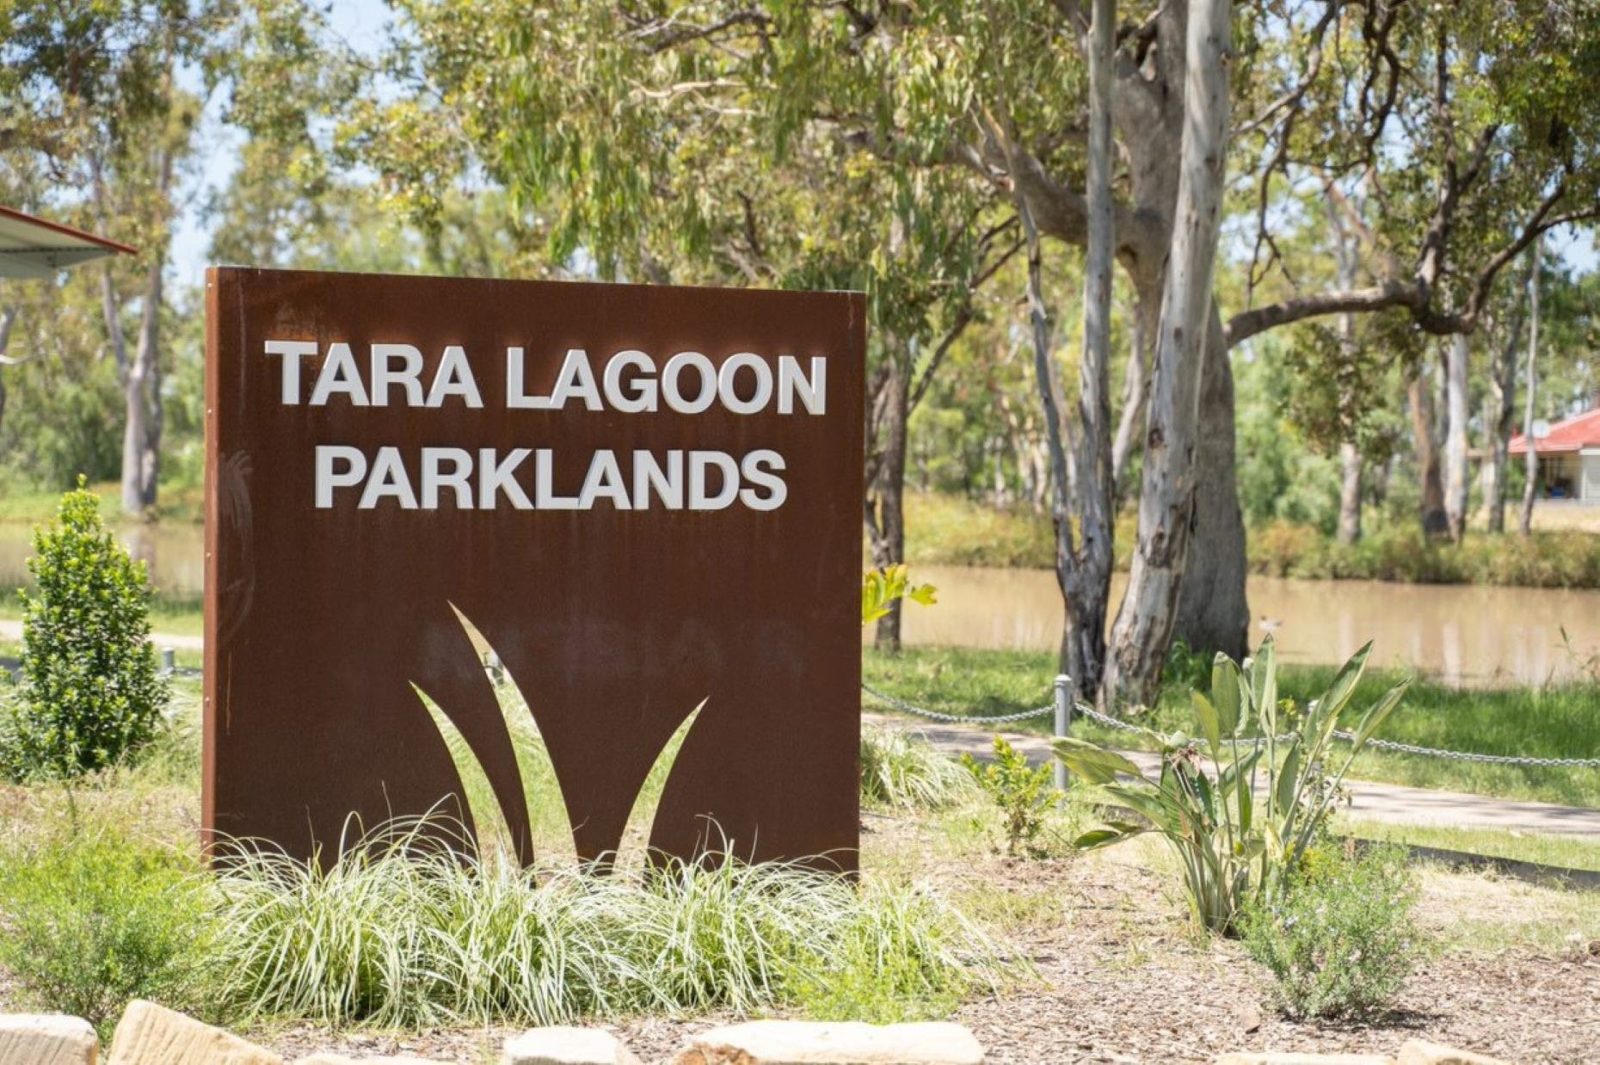 Welcome to the Tara Lagoon Parklands - a lovely spot for camping and relaxing.